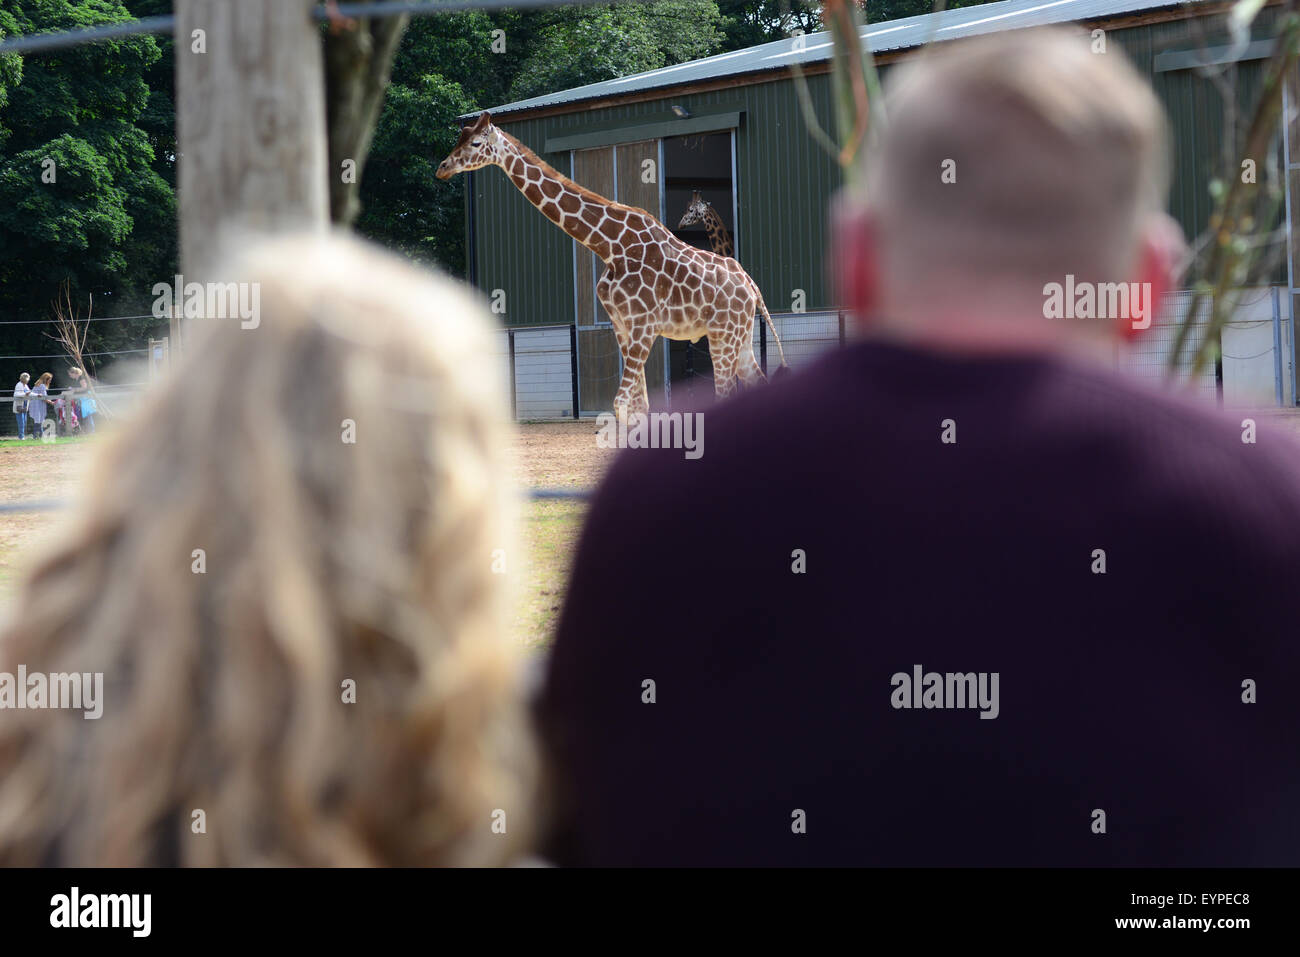 Visitors watching a giraffe at Yorkshire Wildlife Park, Doncaster, South Yorkshire, UK. Picture: Scott Bairstow/Alamy Stock Photo